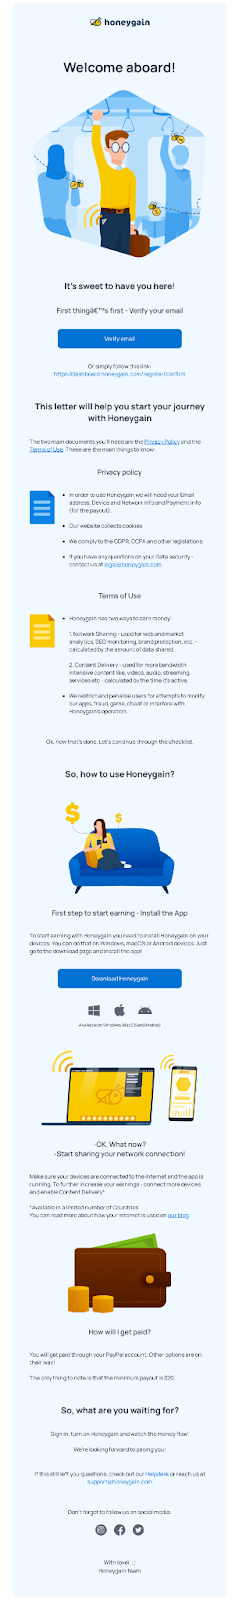 Honeygain double opt-in email example